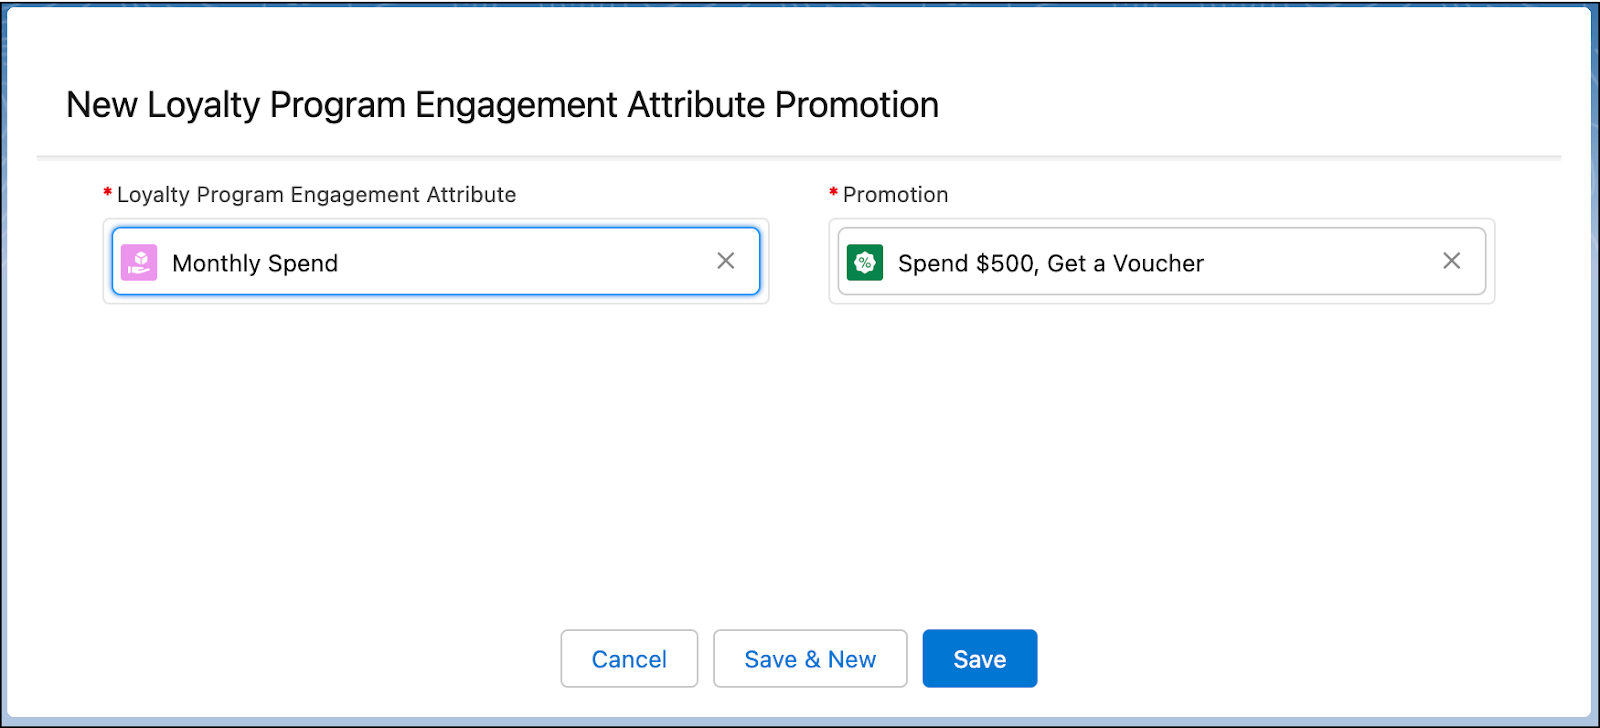 The New Loyalty Program Engagement Attribute Promotion window where you associate an engagement attribute with a promotion